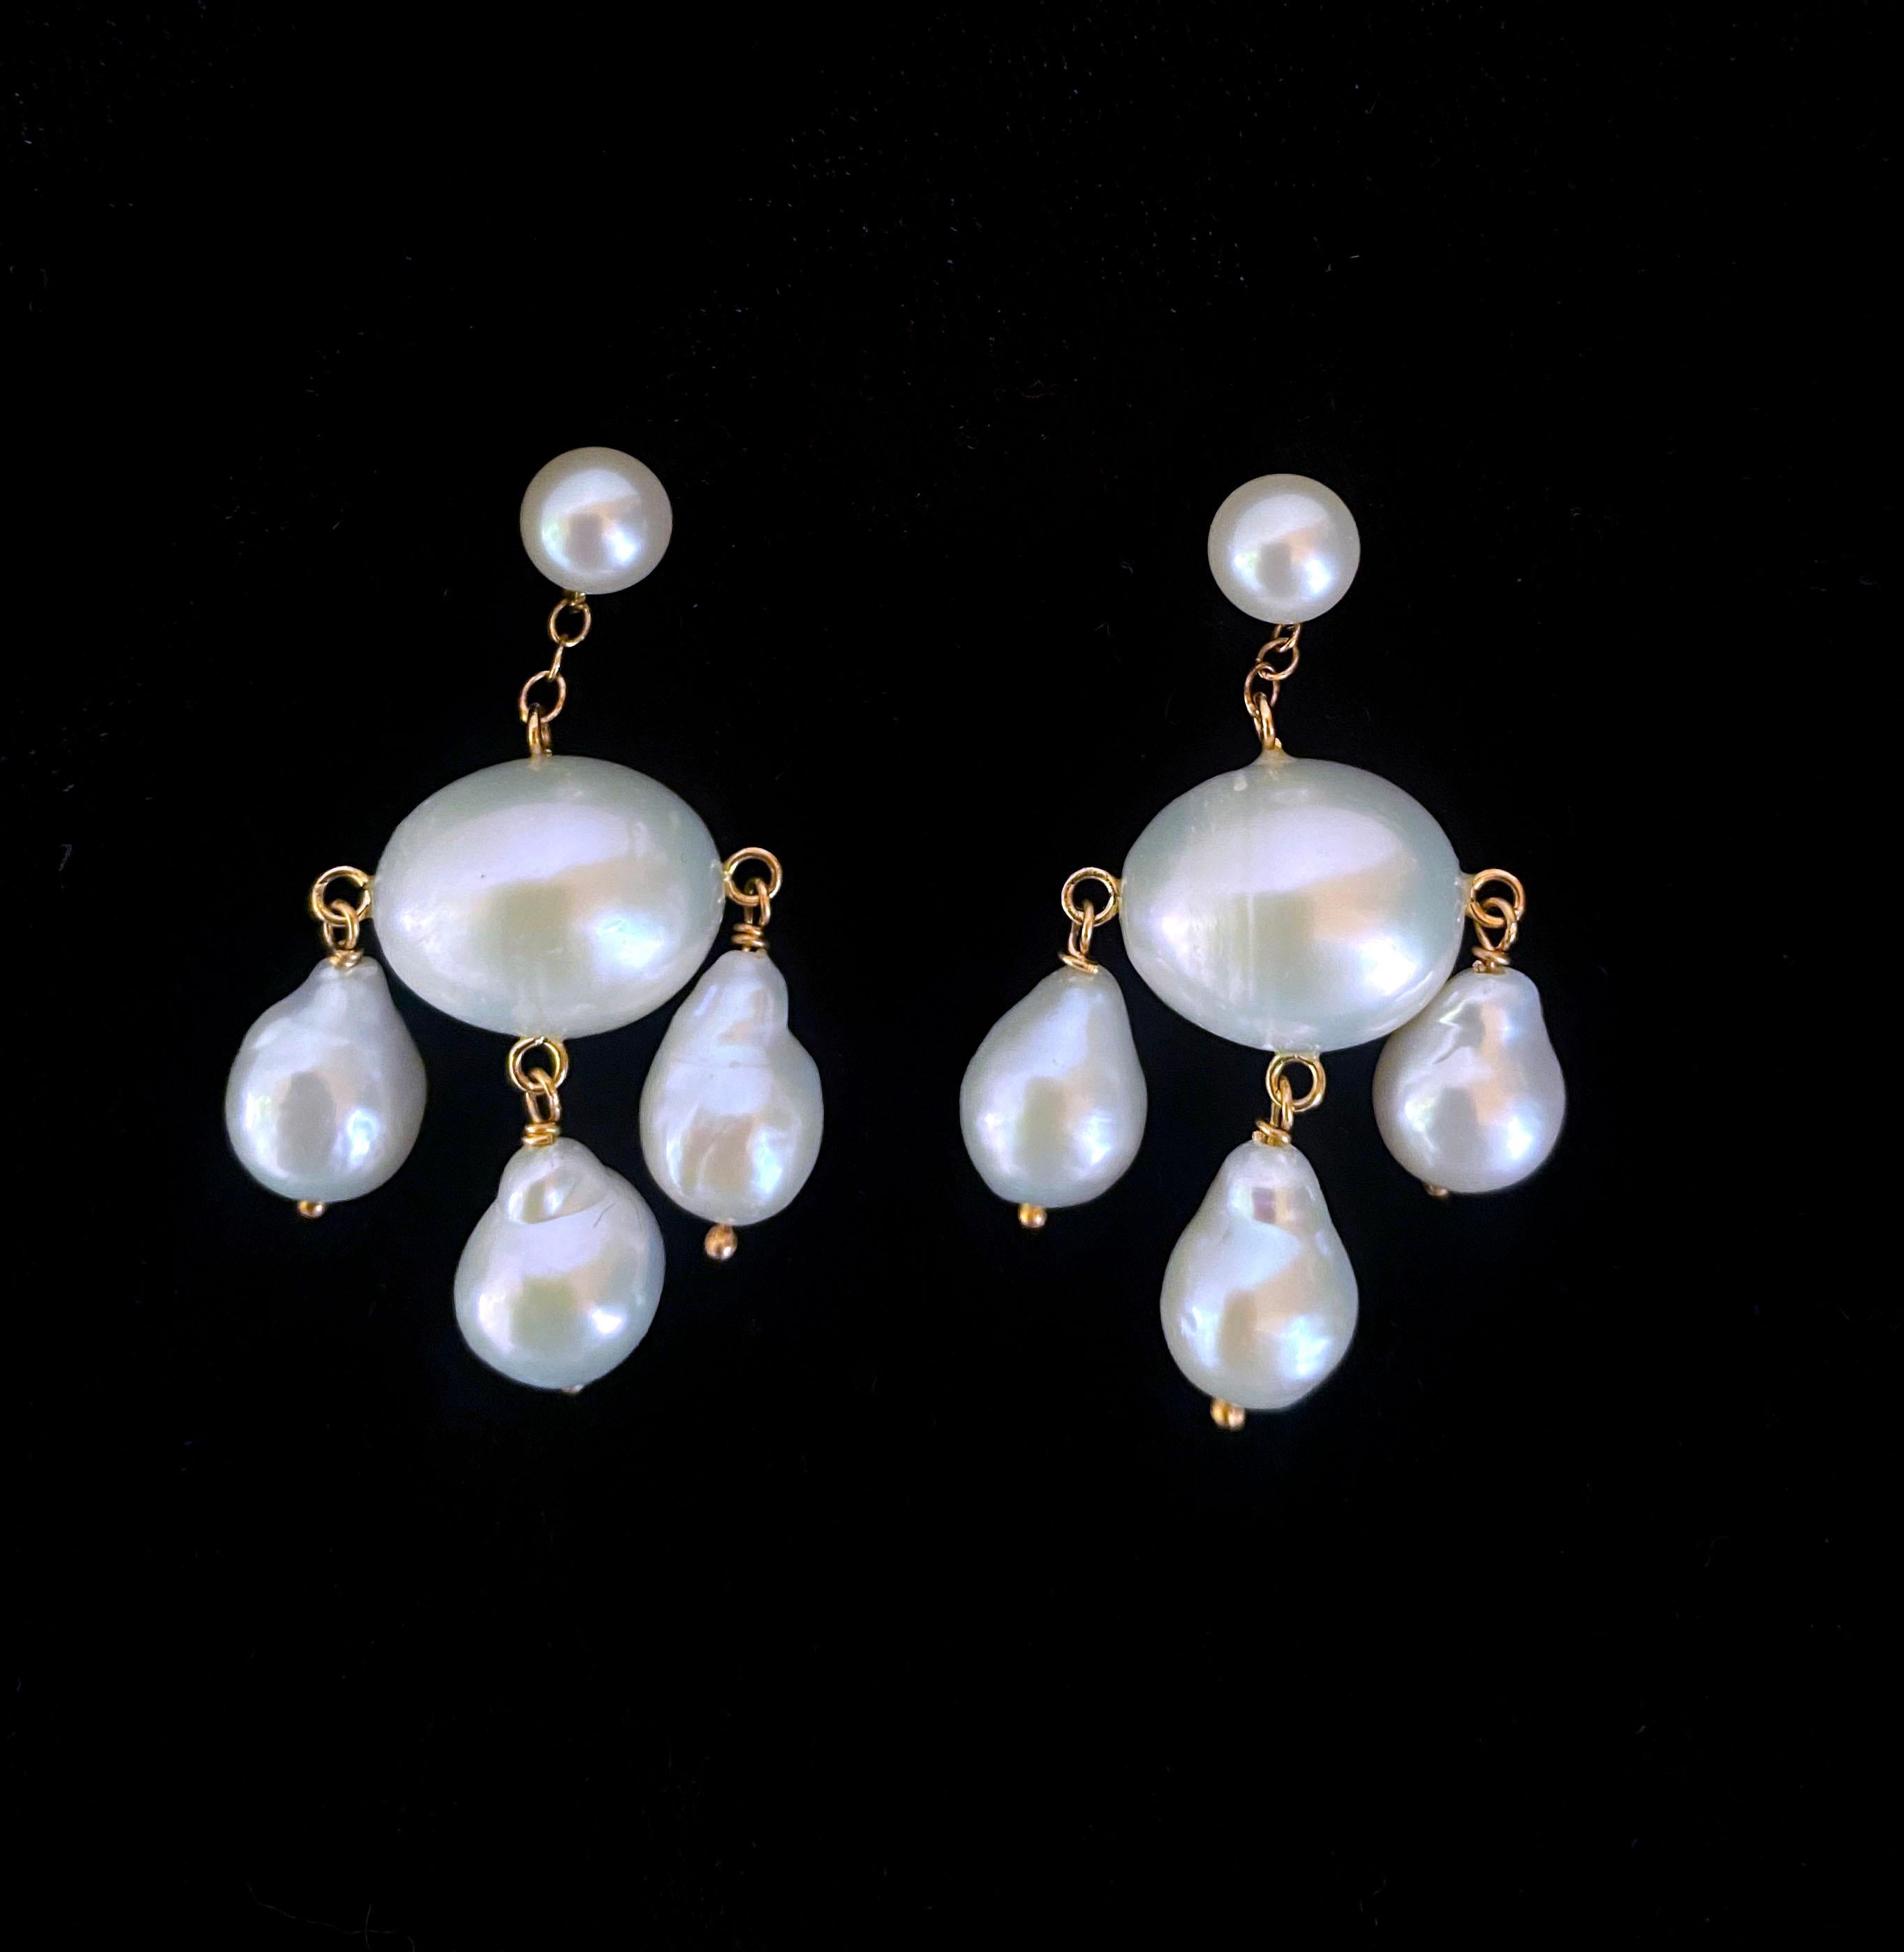 Classic pair of Marina J. Chandelier earrings. This lovely pair is made entirely of high luster white Baroque Pearls which display a vivid iridescence. Three teardrop Pearls dangle from an oval shaped Baroque Pearl bead, created entirely with 14k